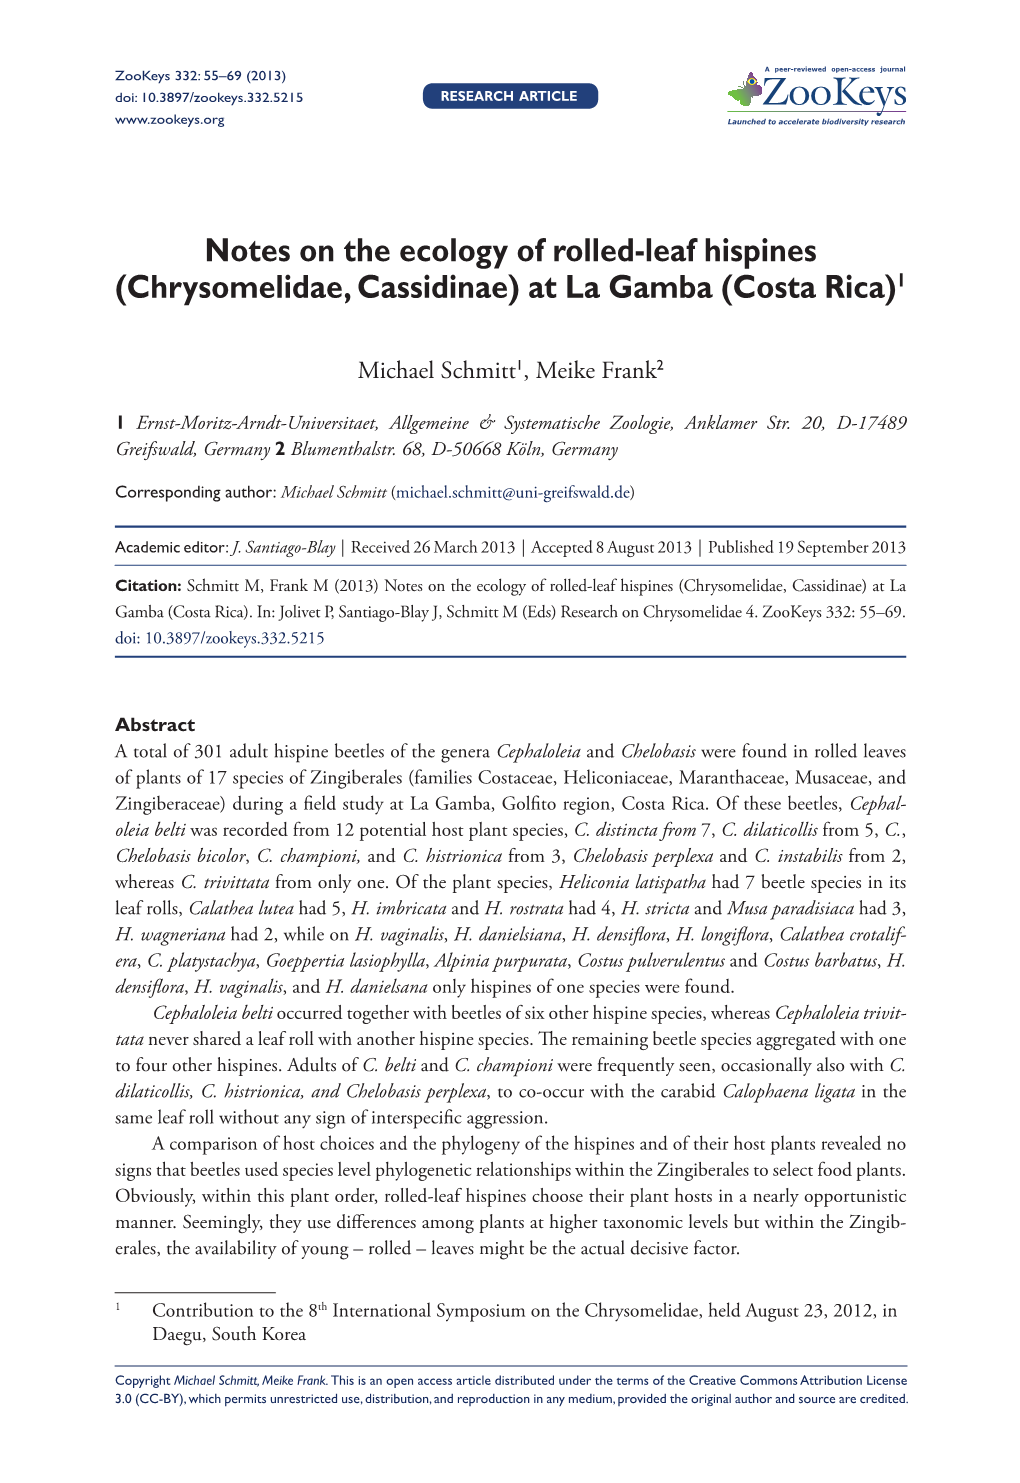 Notes on the Ecology of Rolled-Leaf Hispines (Chrysomelidae, Cassidinae) at La Gamba (Costa Rica)1